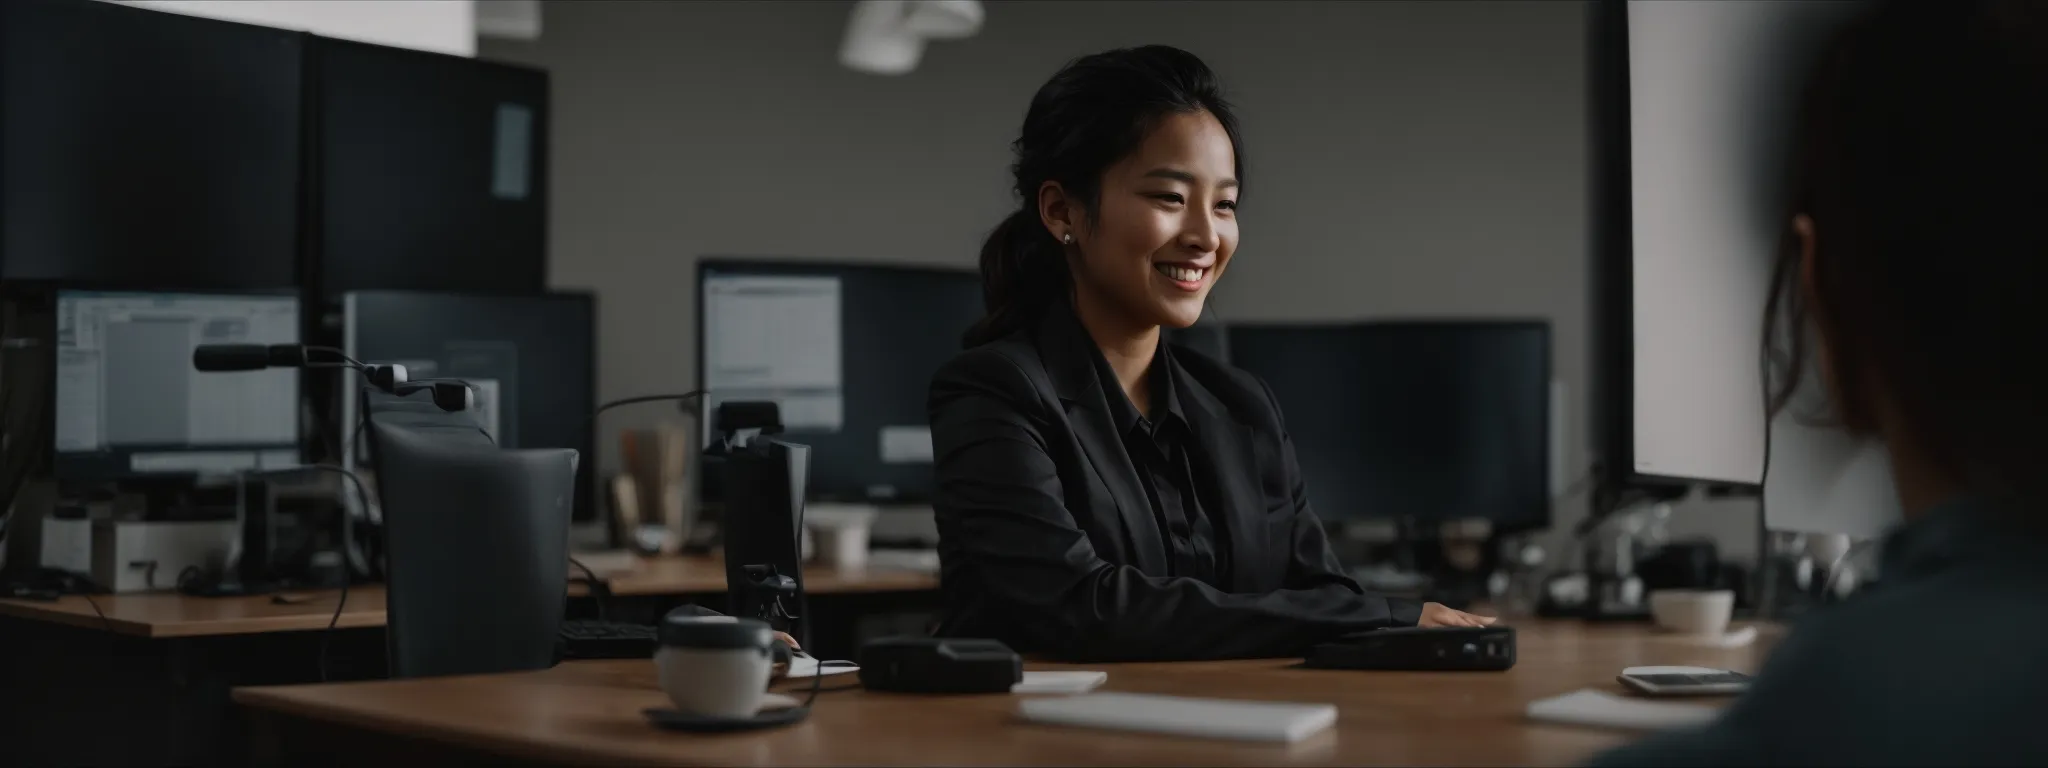 a professional smiling at her computer screen in a minimalist office setup with a clock indicating the early morning hours.